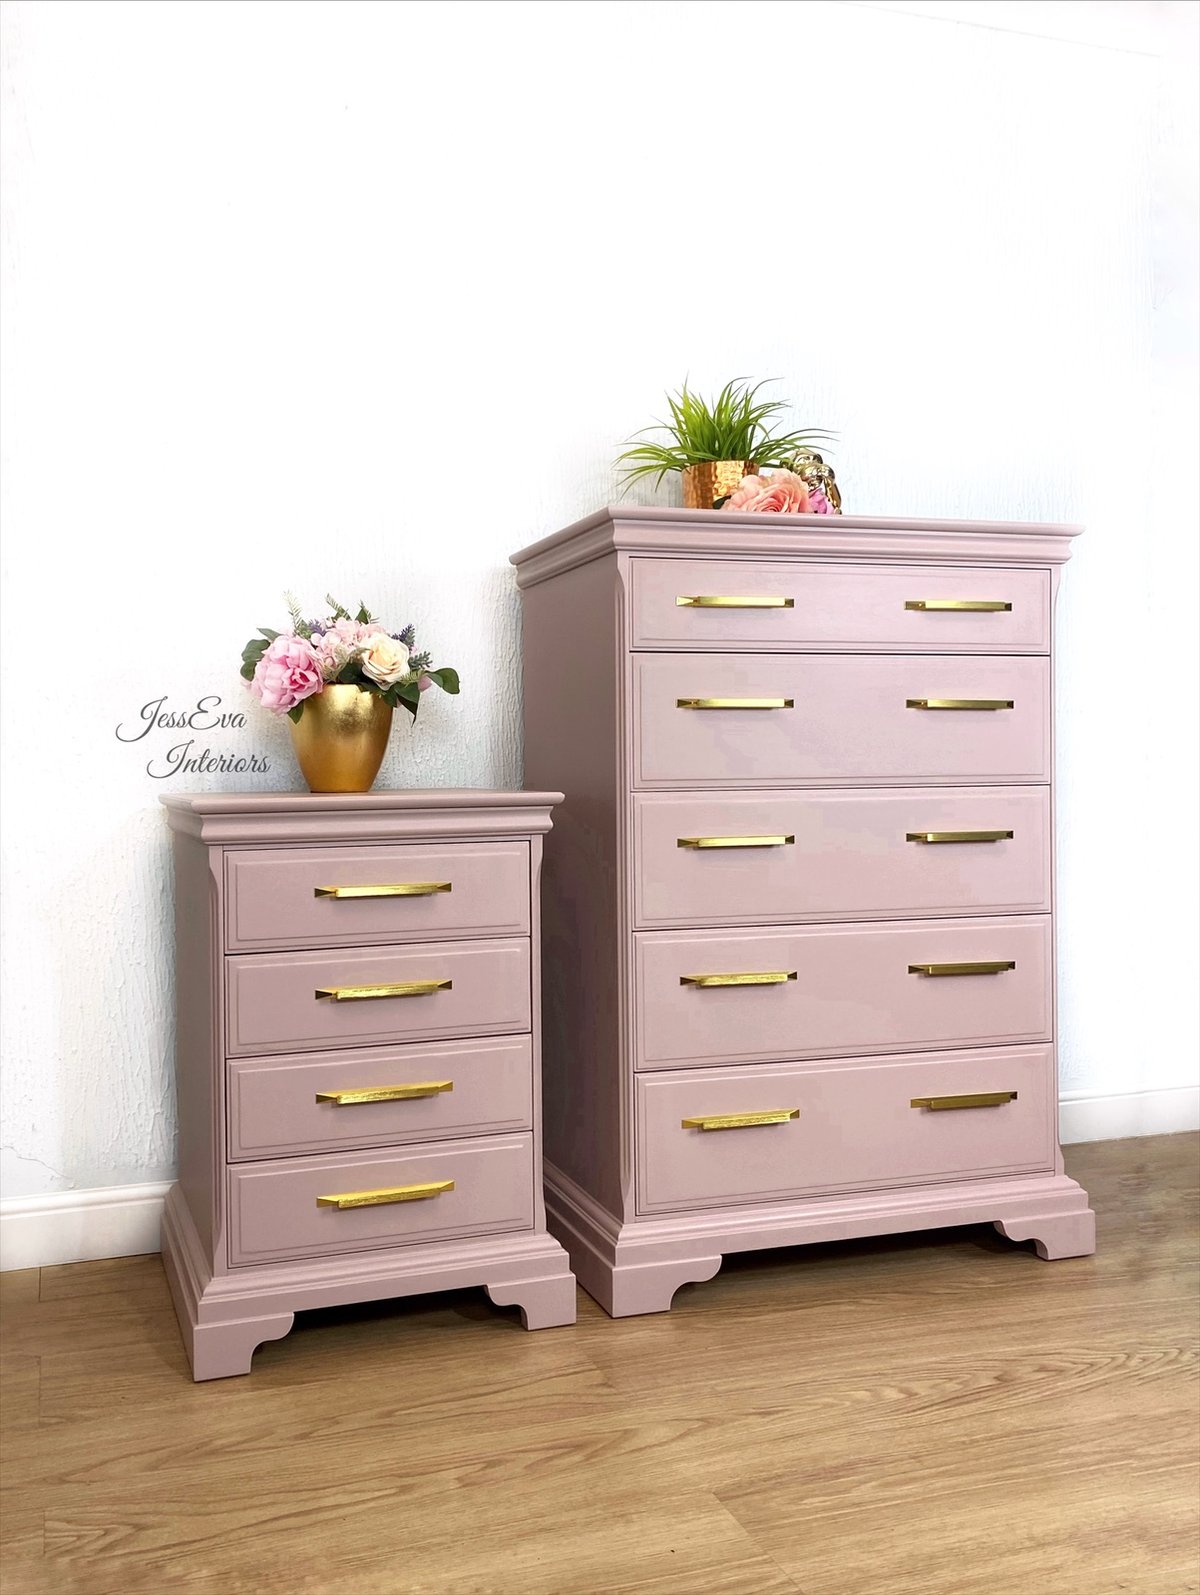 Stag Chest Of Drawers and Bedside Table painted in dusty pink with gold handles